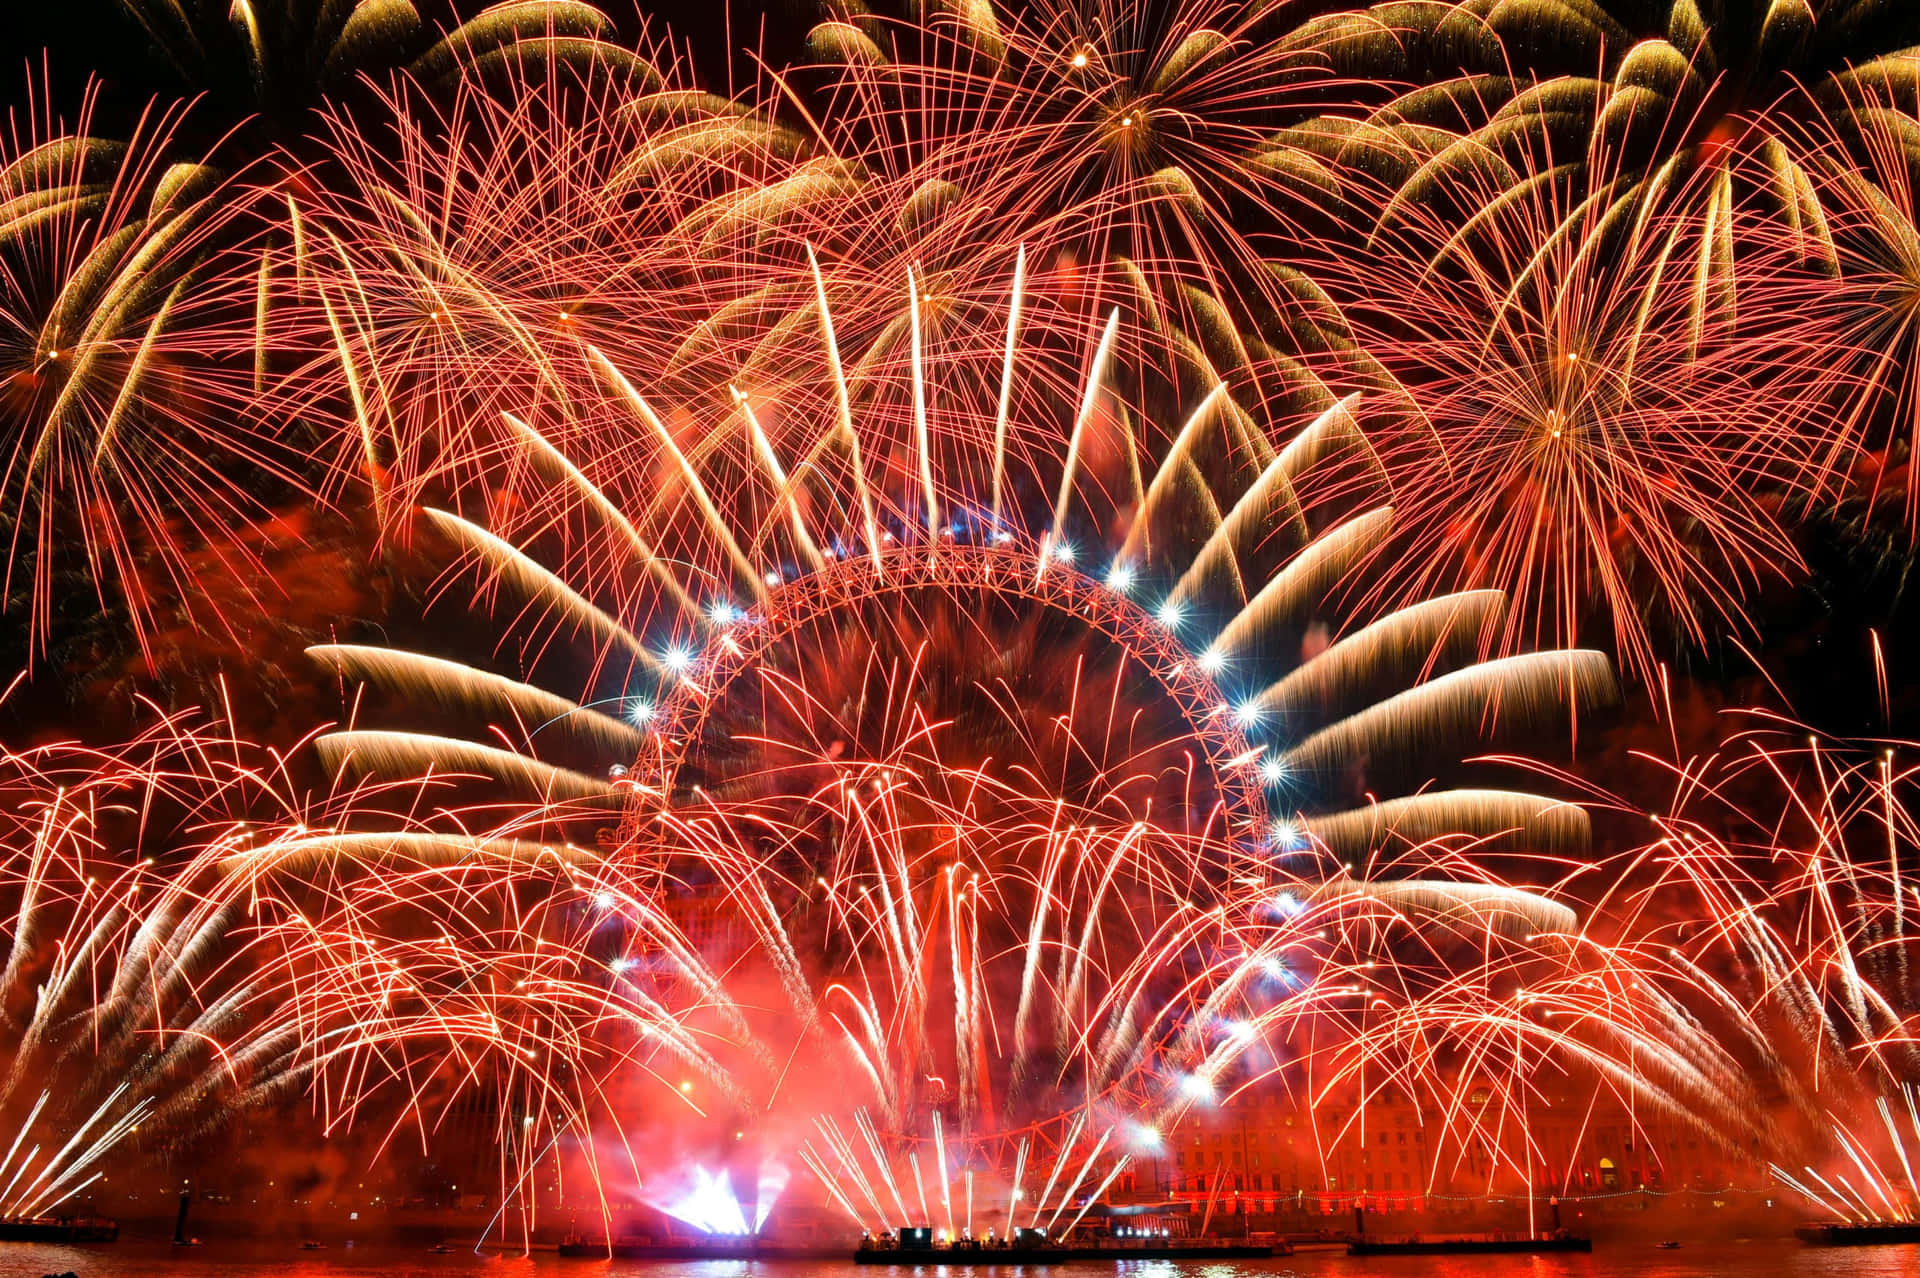 A Large Firework Display Over The London Eye